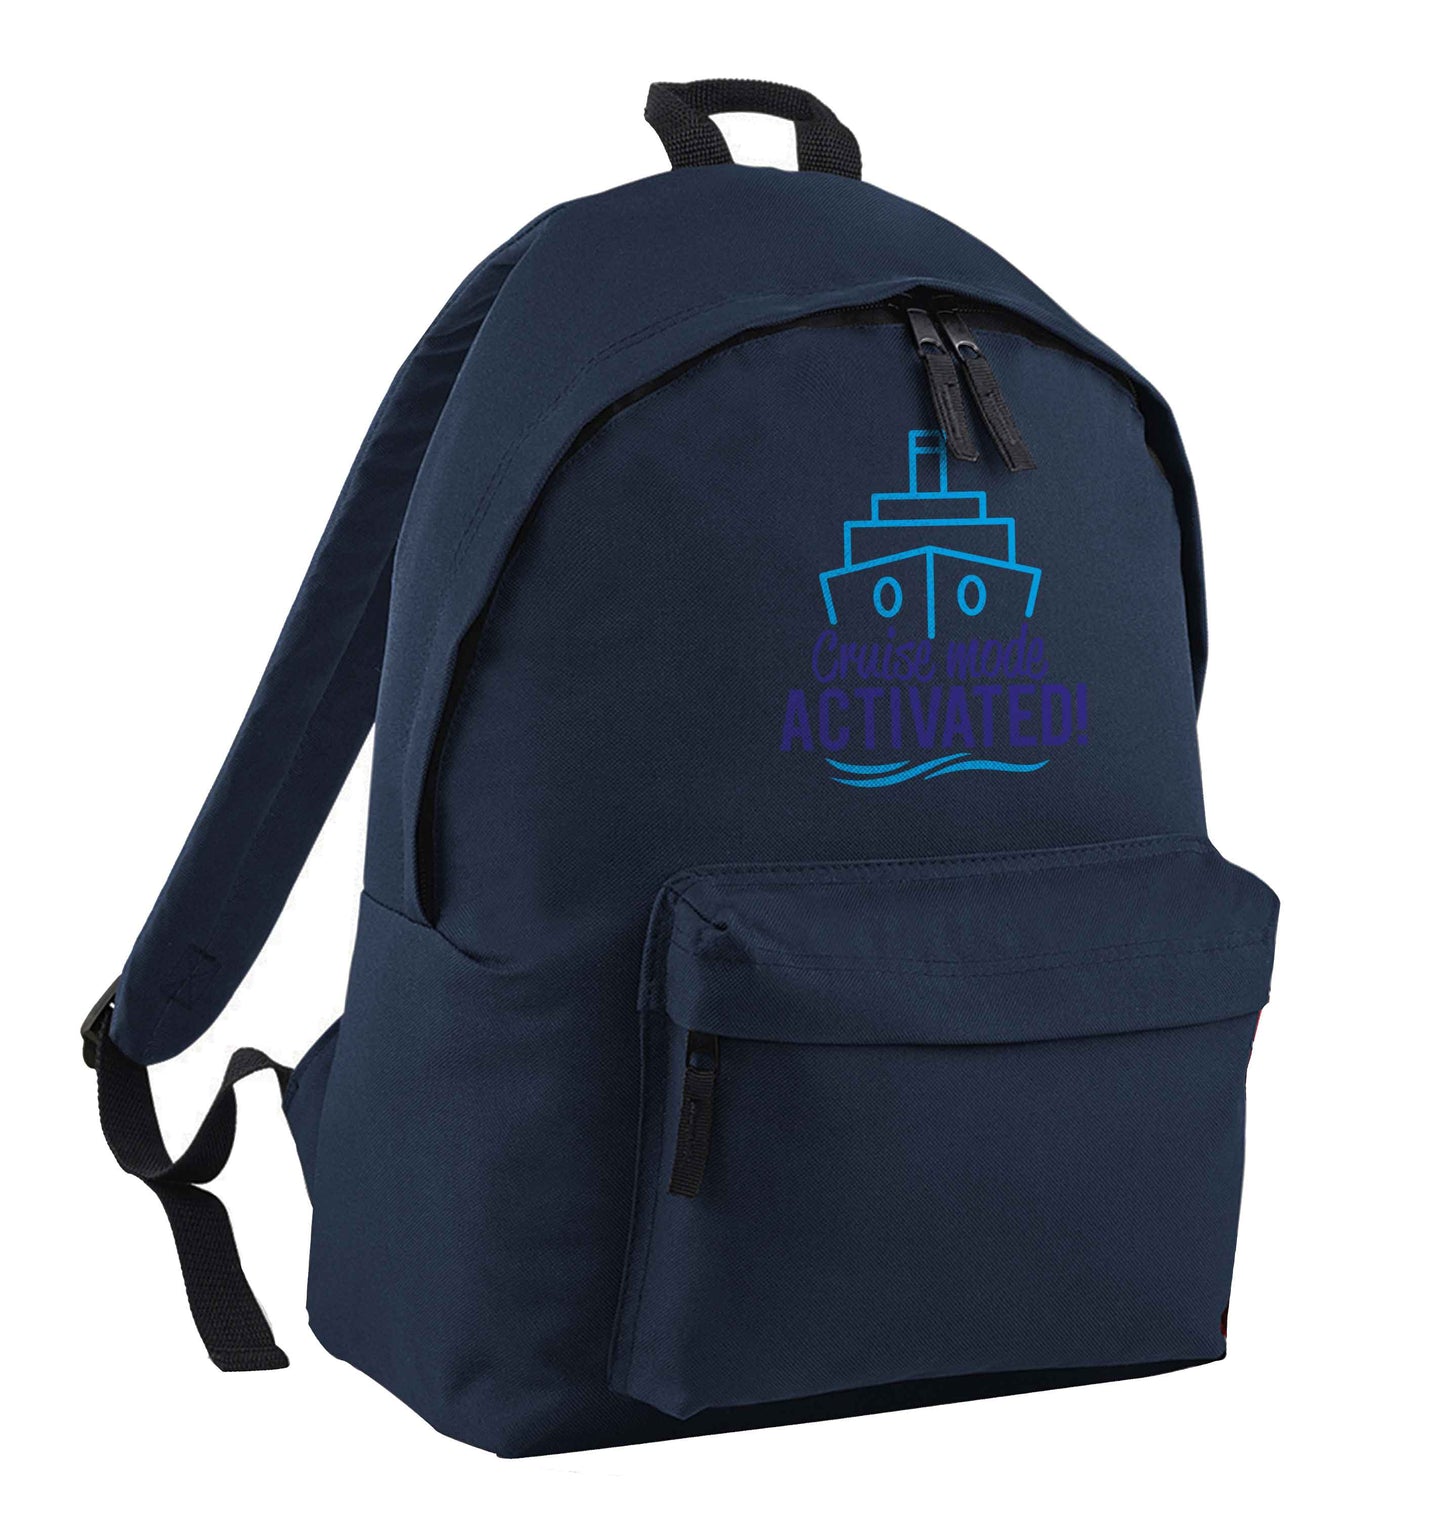 Cruise mode activated navy adults backpack